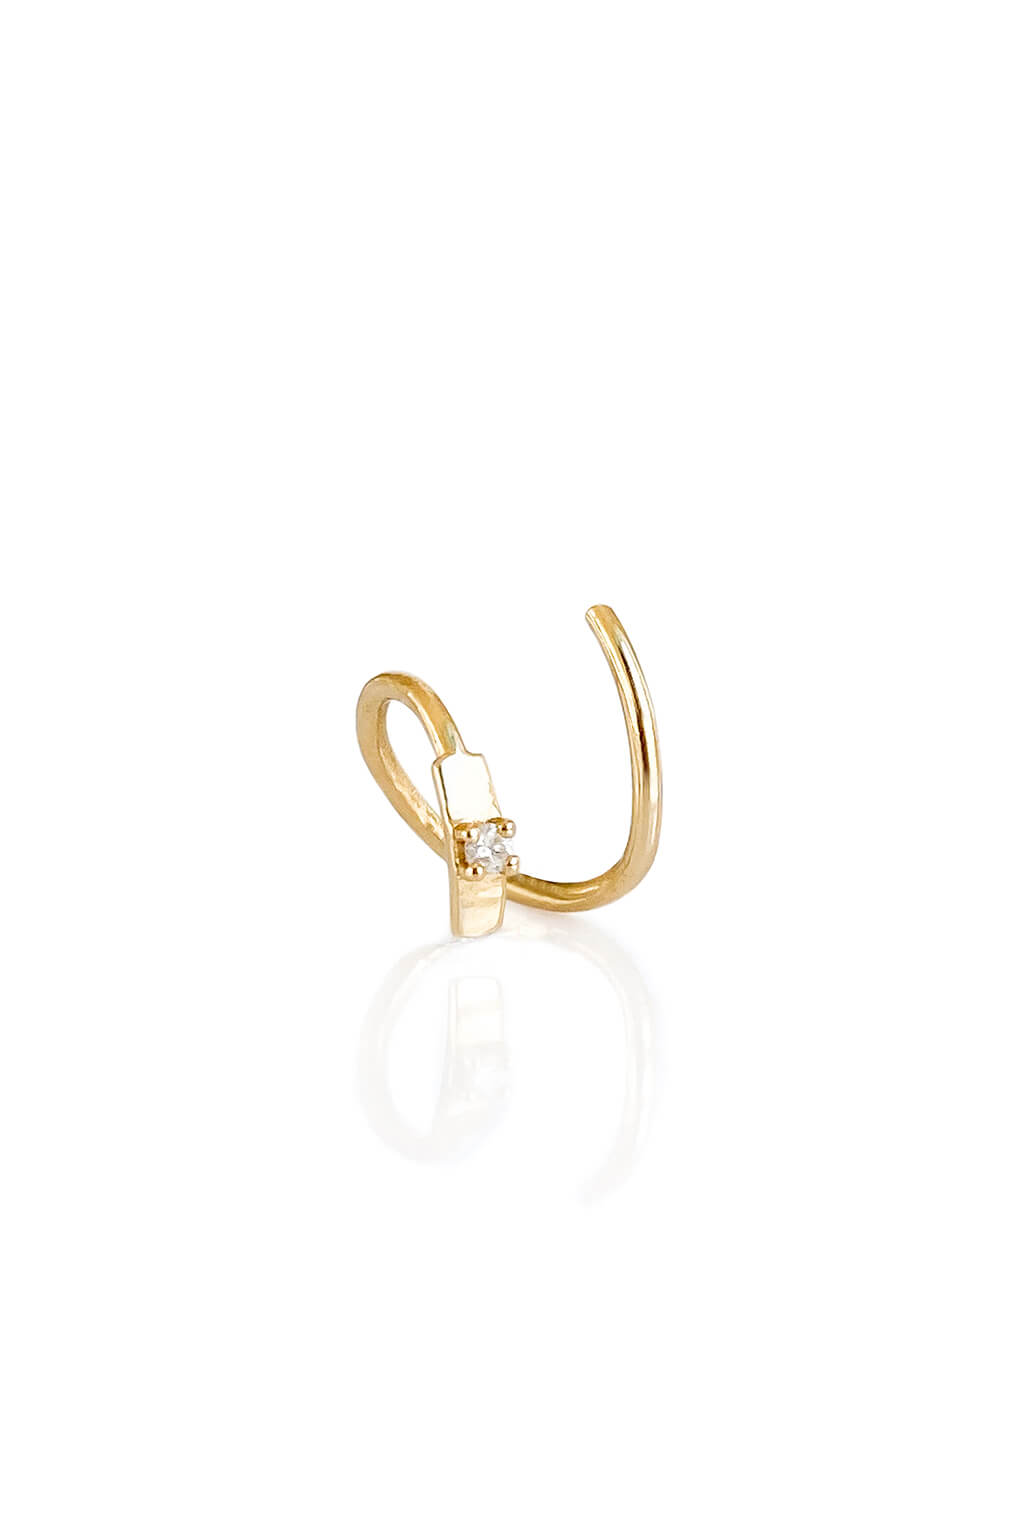 Tag Snake gold earring